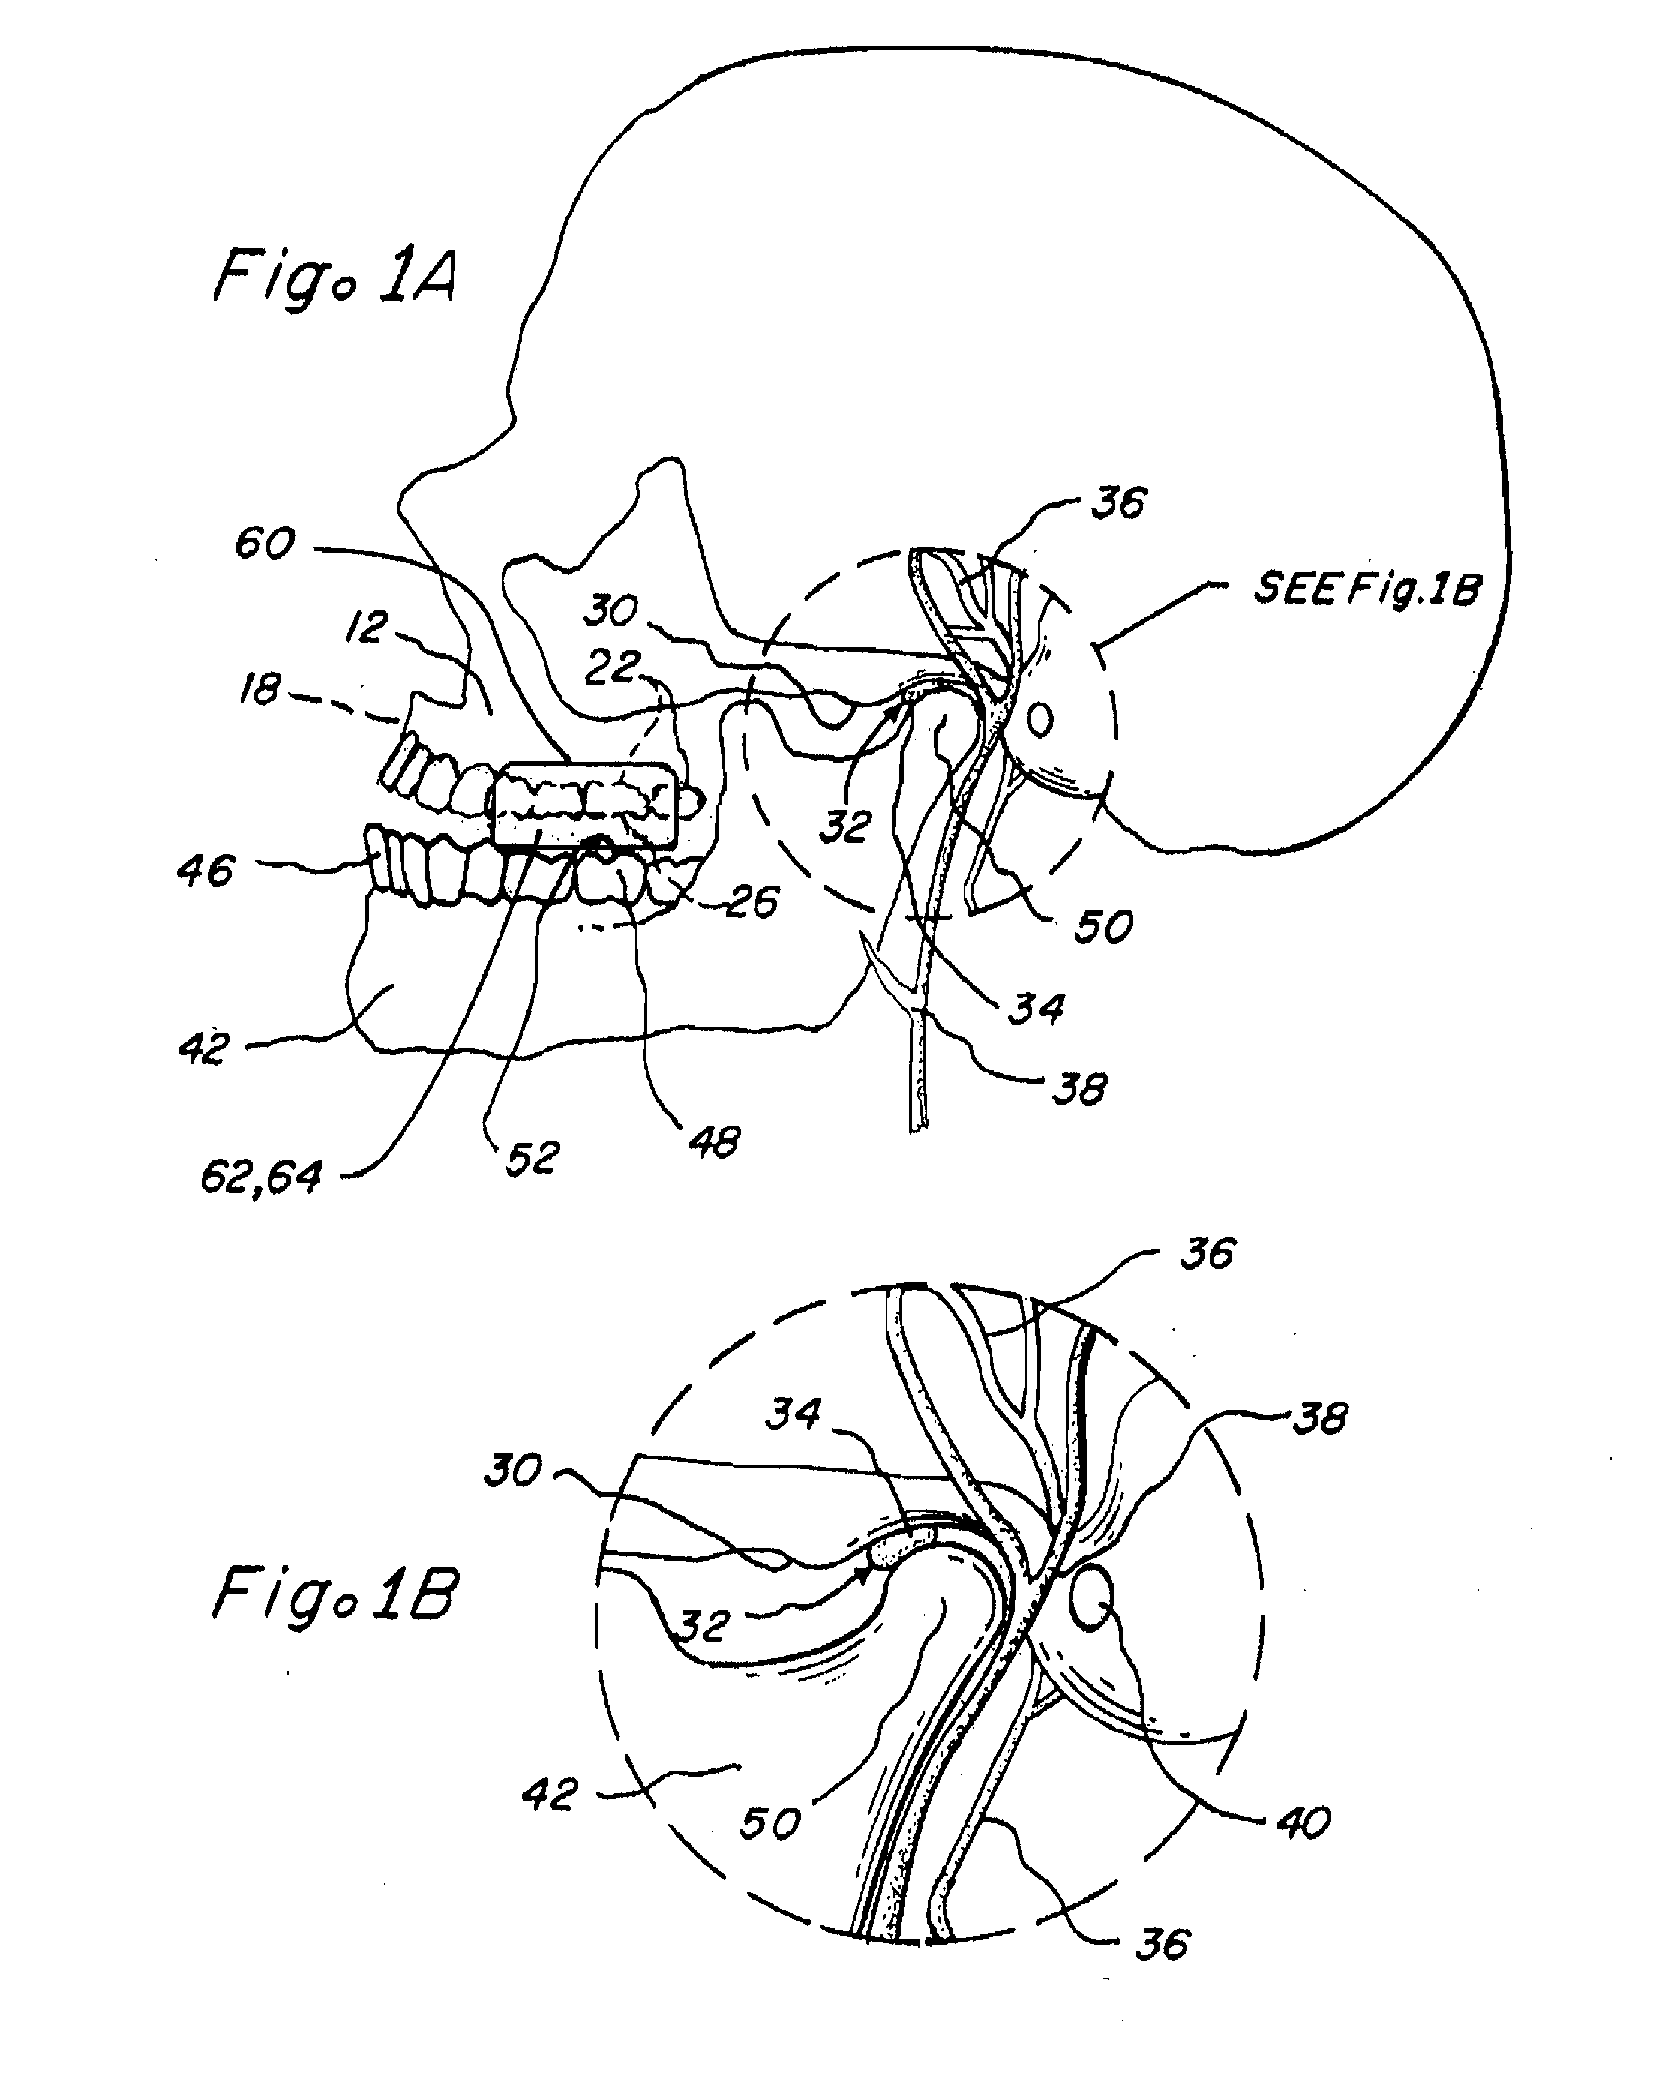 Methods and apparatus for reduction of lactate